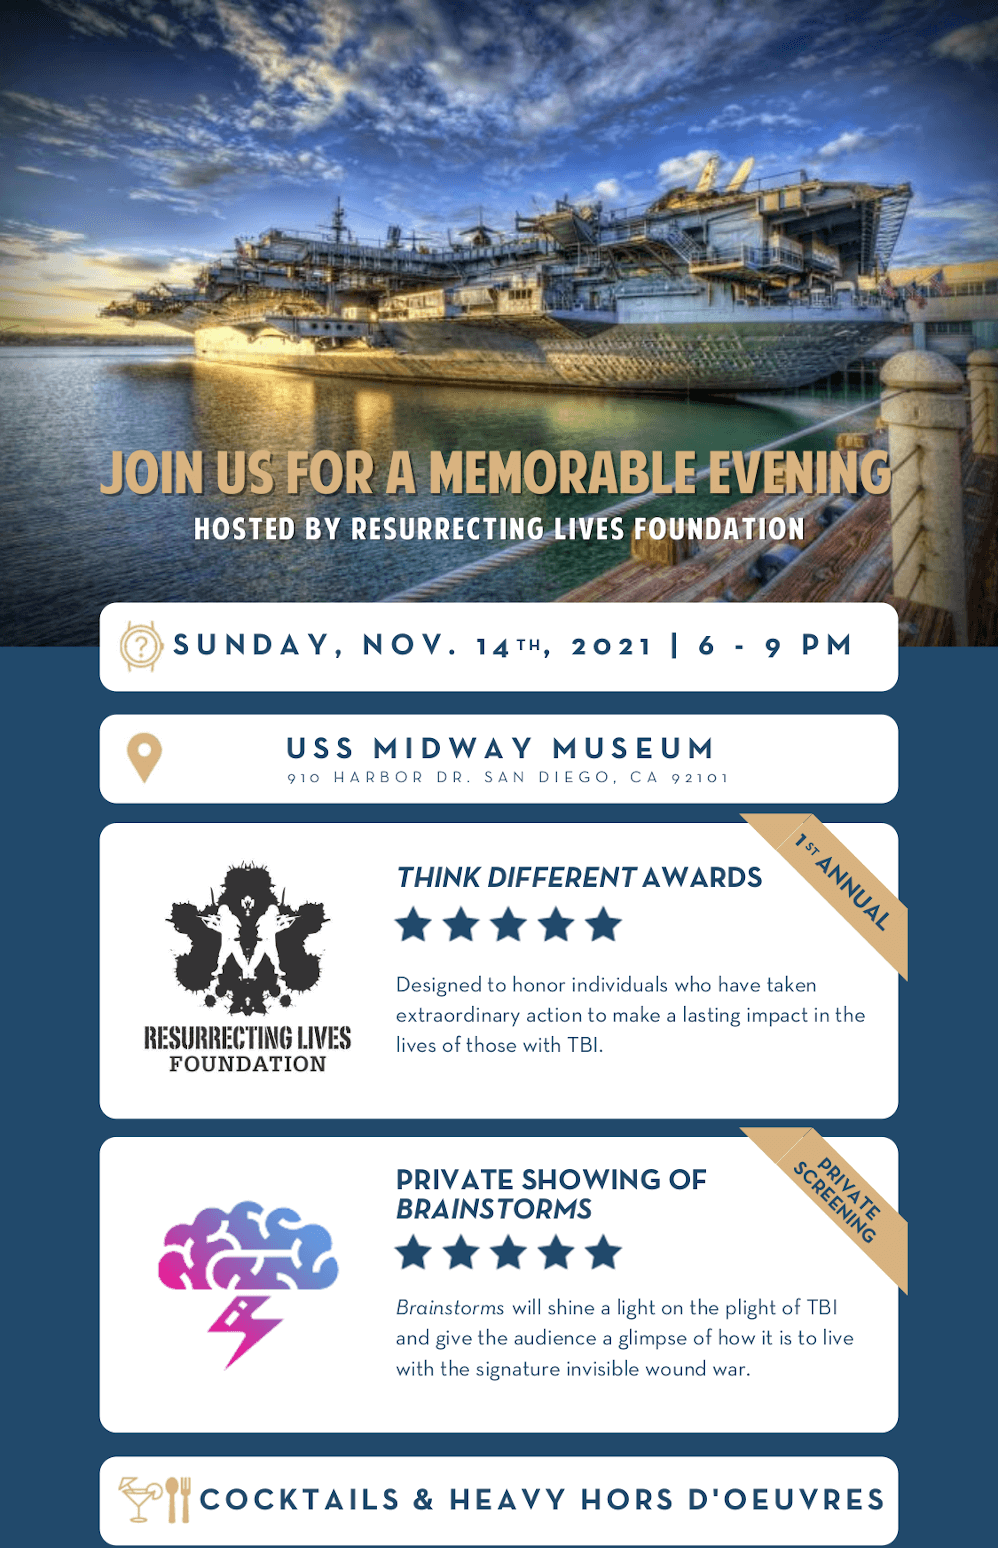 Join us for a memorable evening hosted by Resurrecting Lives foundation sunday November 14, 2021 6-9PM USS Midway Museum 910 harbor dr. San Diego, CA 92101.